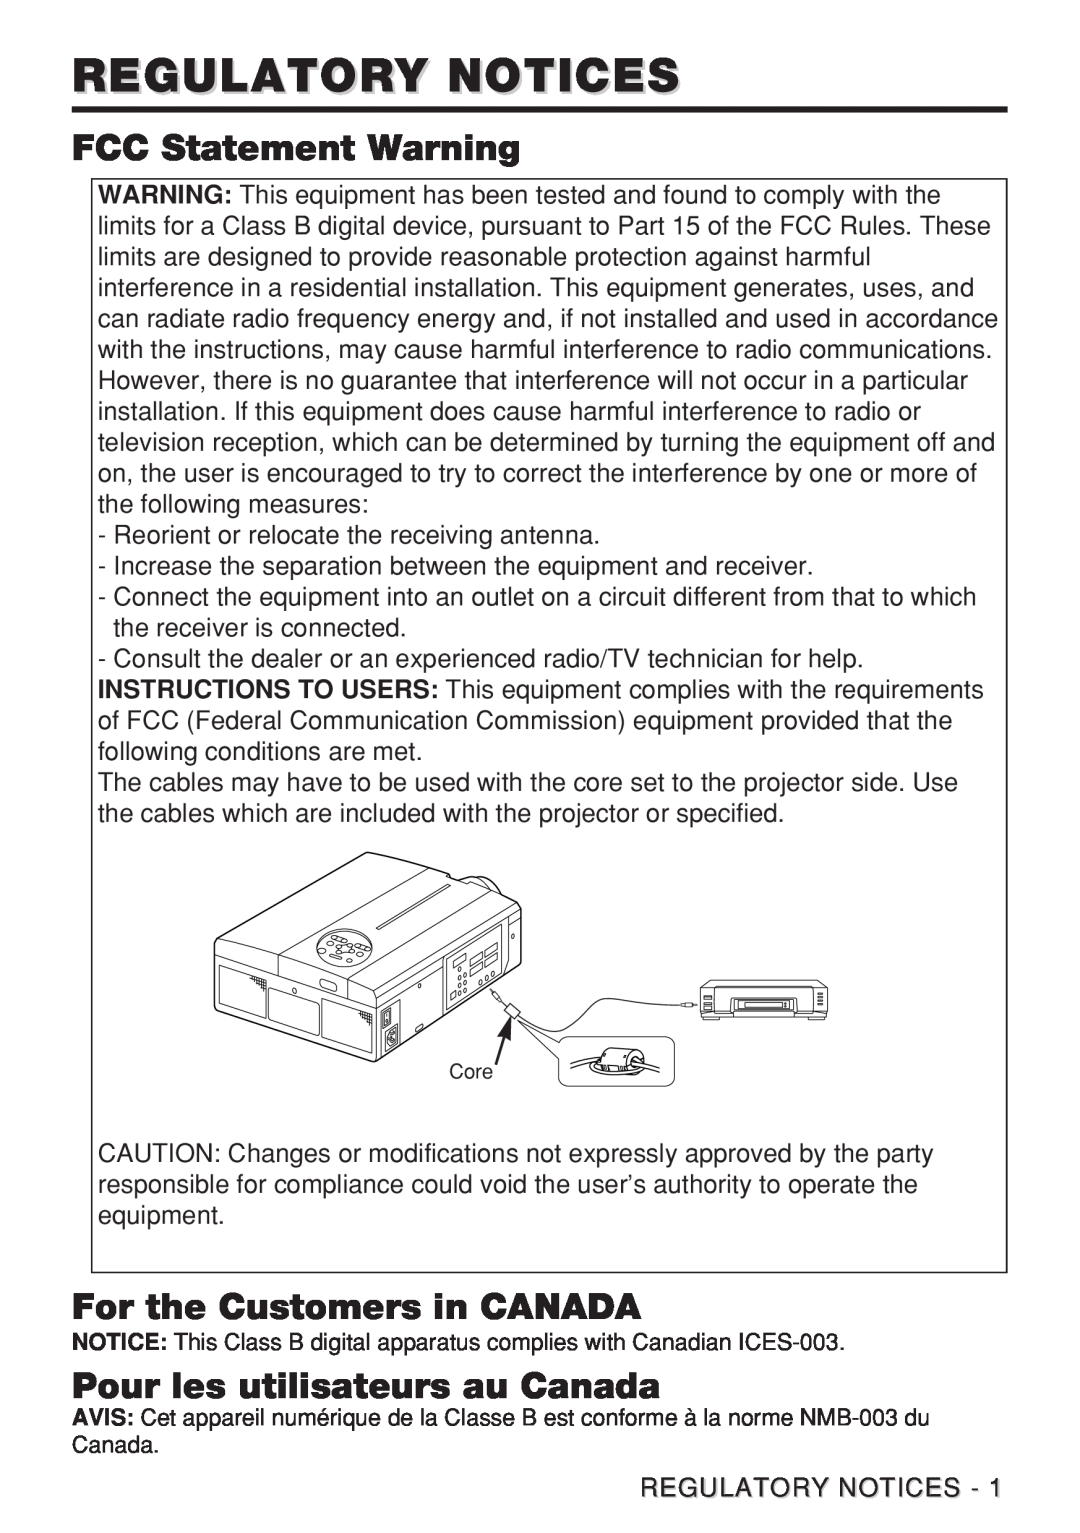 Hitachi CP-X980W Regulatory Notices, FCC Statement Warning, For the Customers in CANADA, Pour les utilisateurs au Canada 